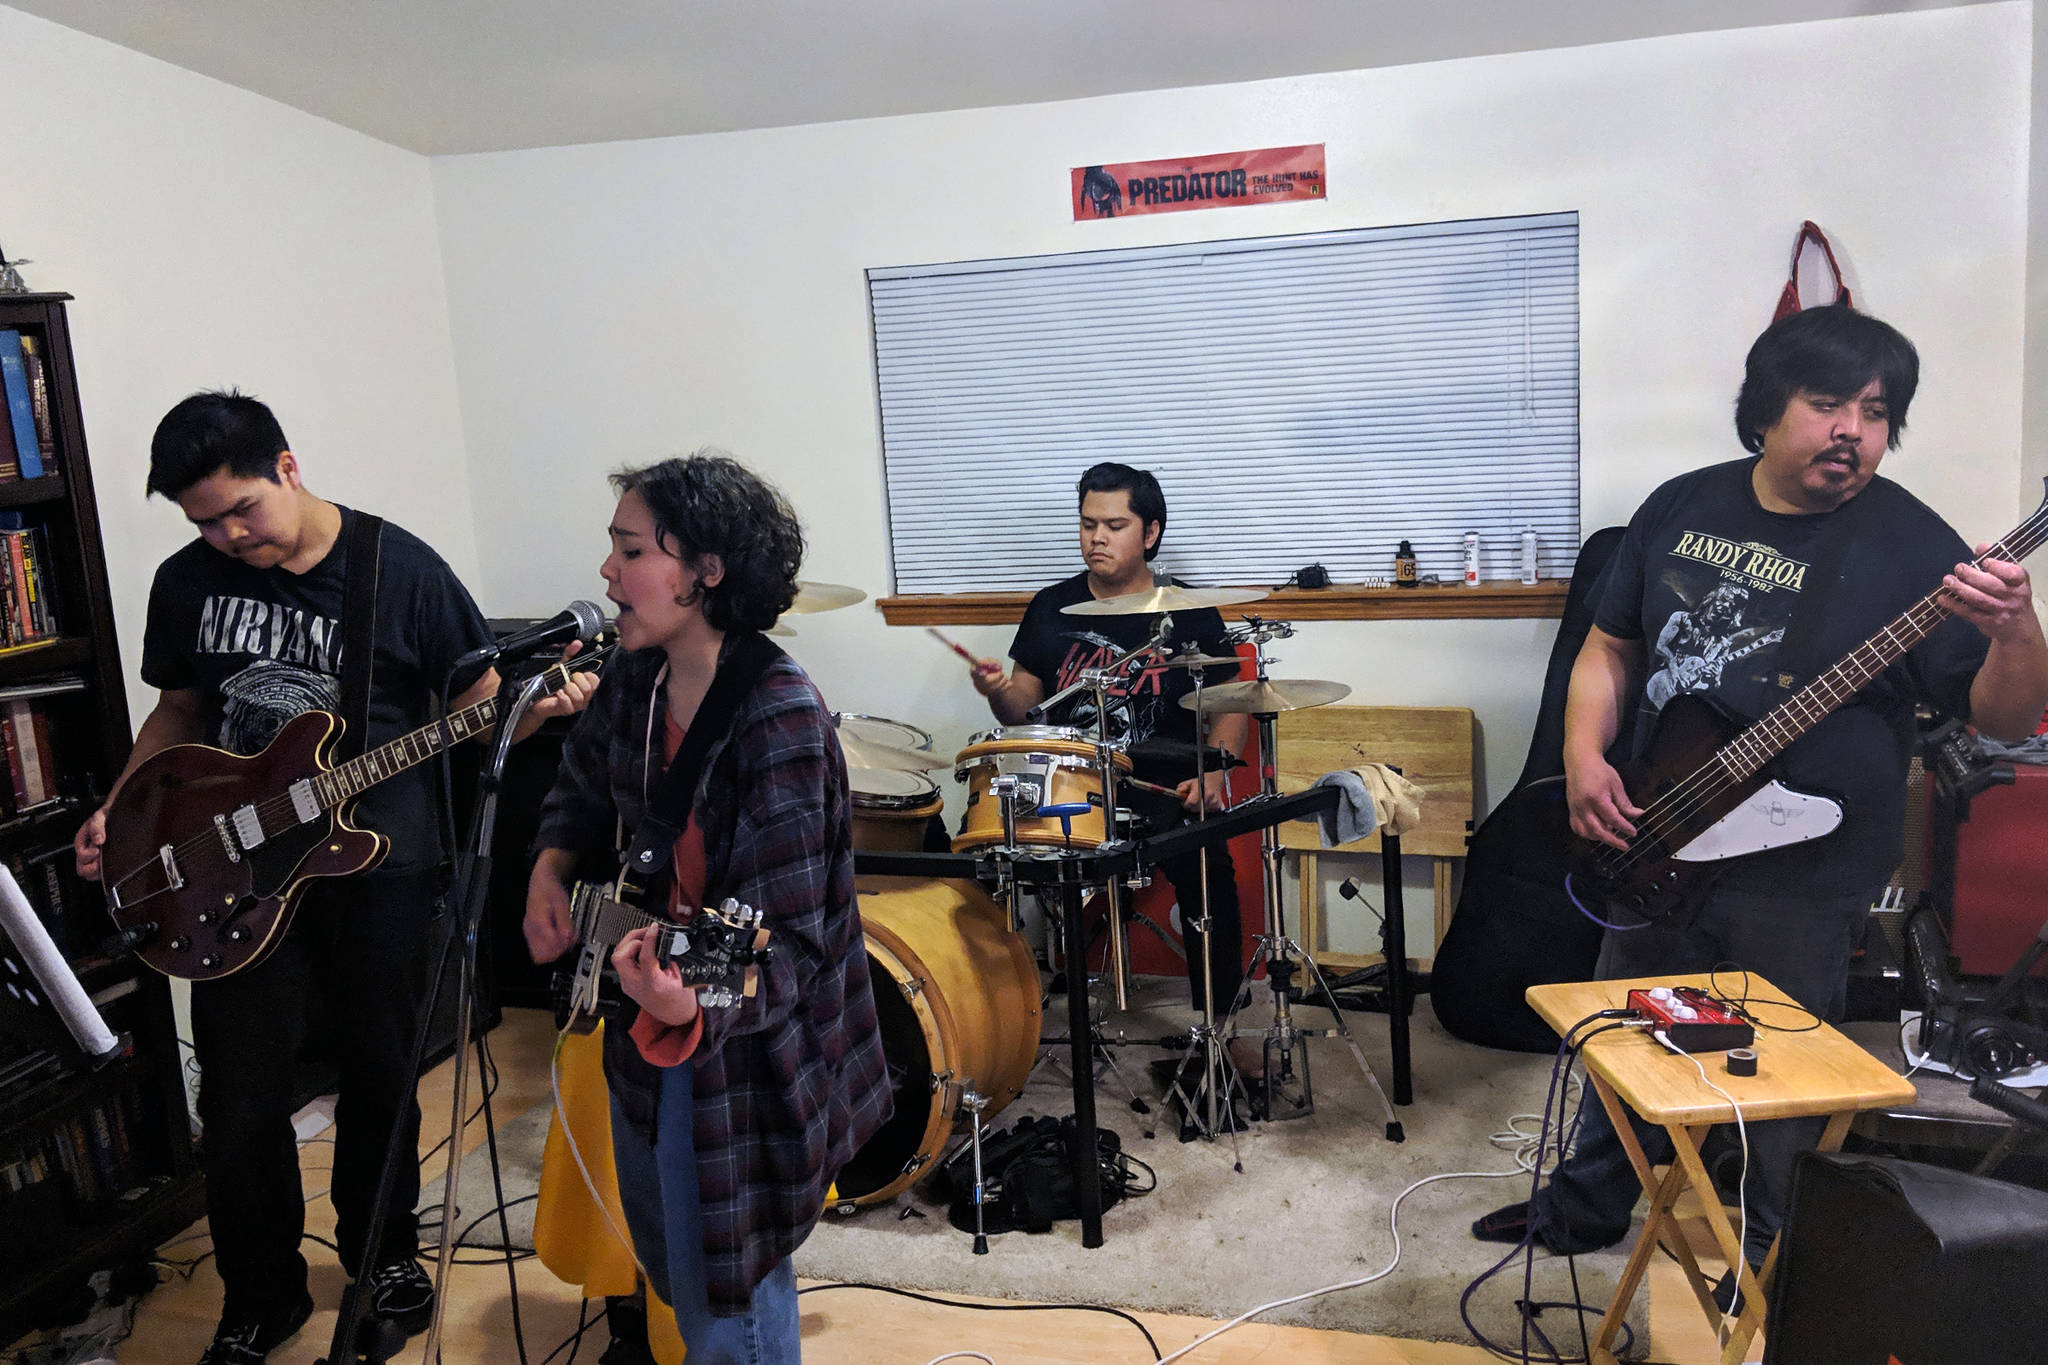 Garden of Agony plays in the Friday family’s living room on Wednesday, Feb. 13, 2019. (Ben Hohenenstatt | Capital City Weekly)